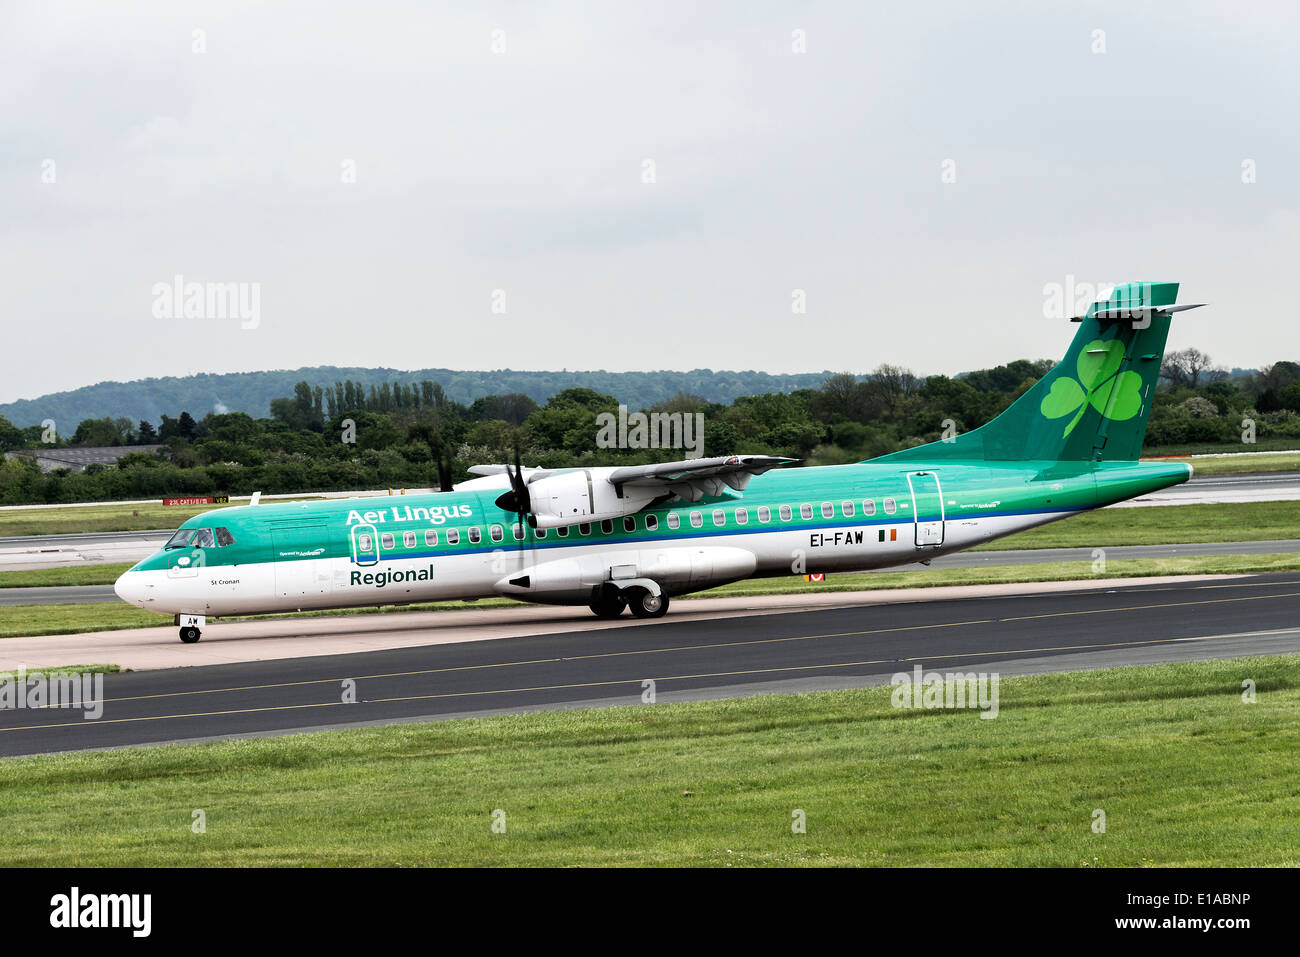 Aer Arann Operating in Aer Lingus Regional Airlines Colours ATR 72-600 Airliner EI-FAW Taxiing at Manchester Airport England UK Stock Photo